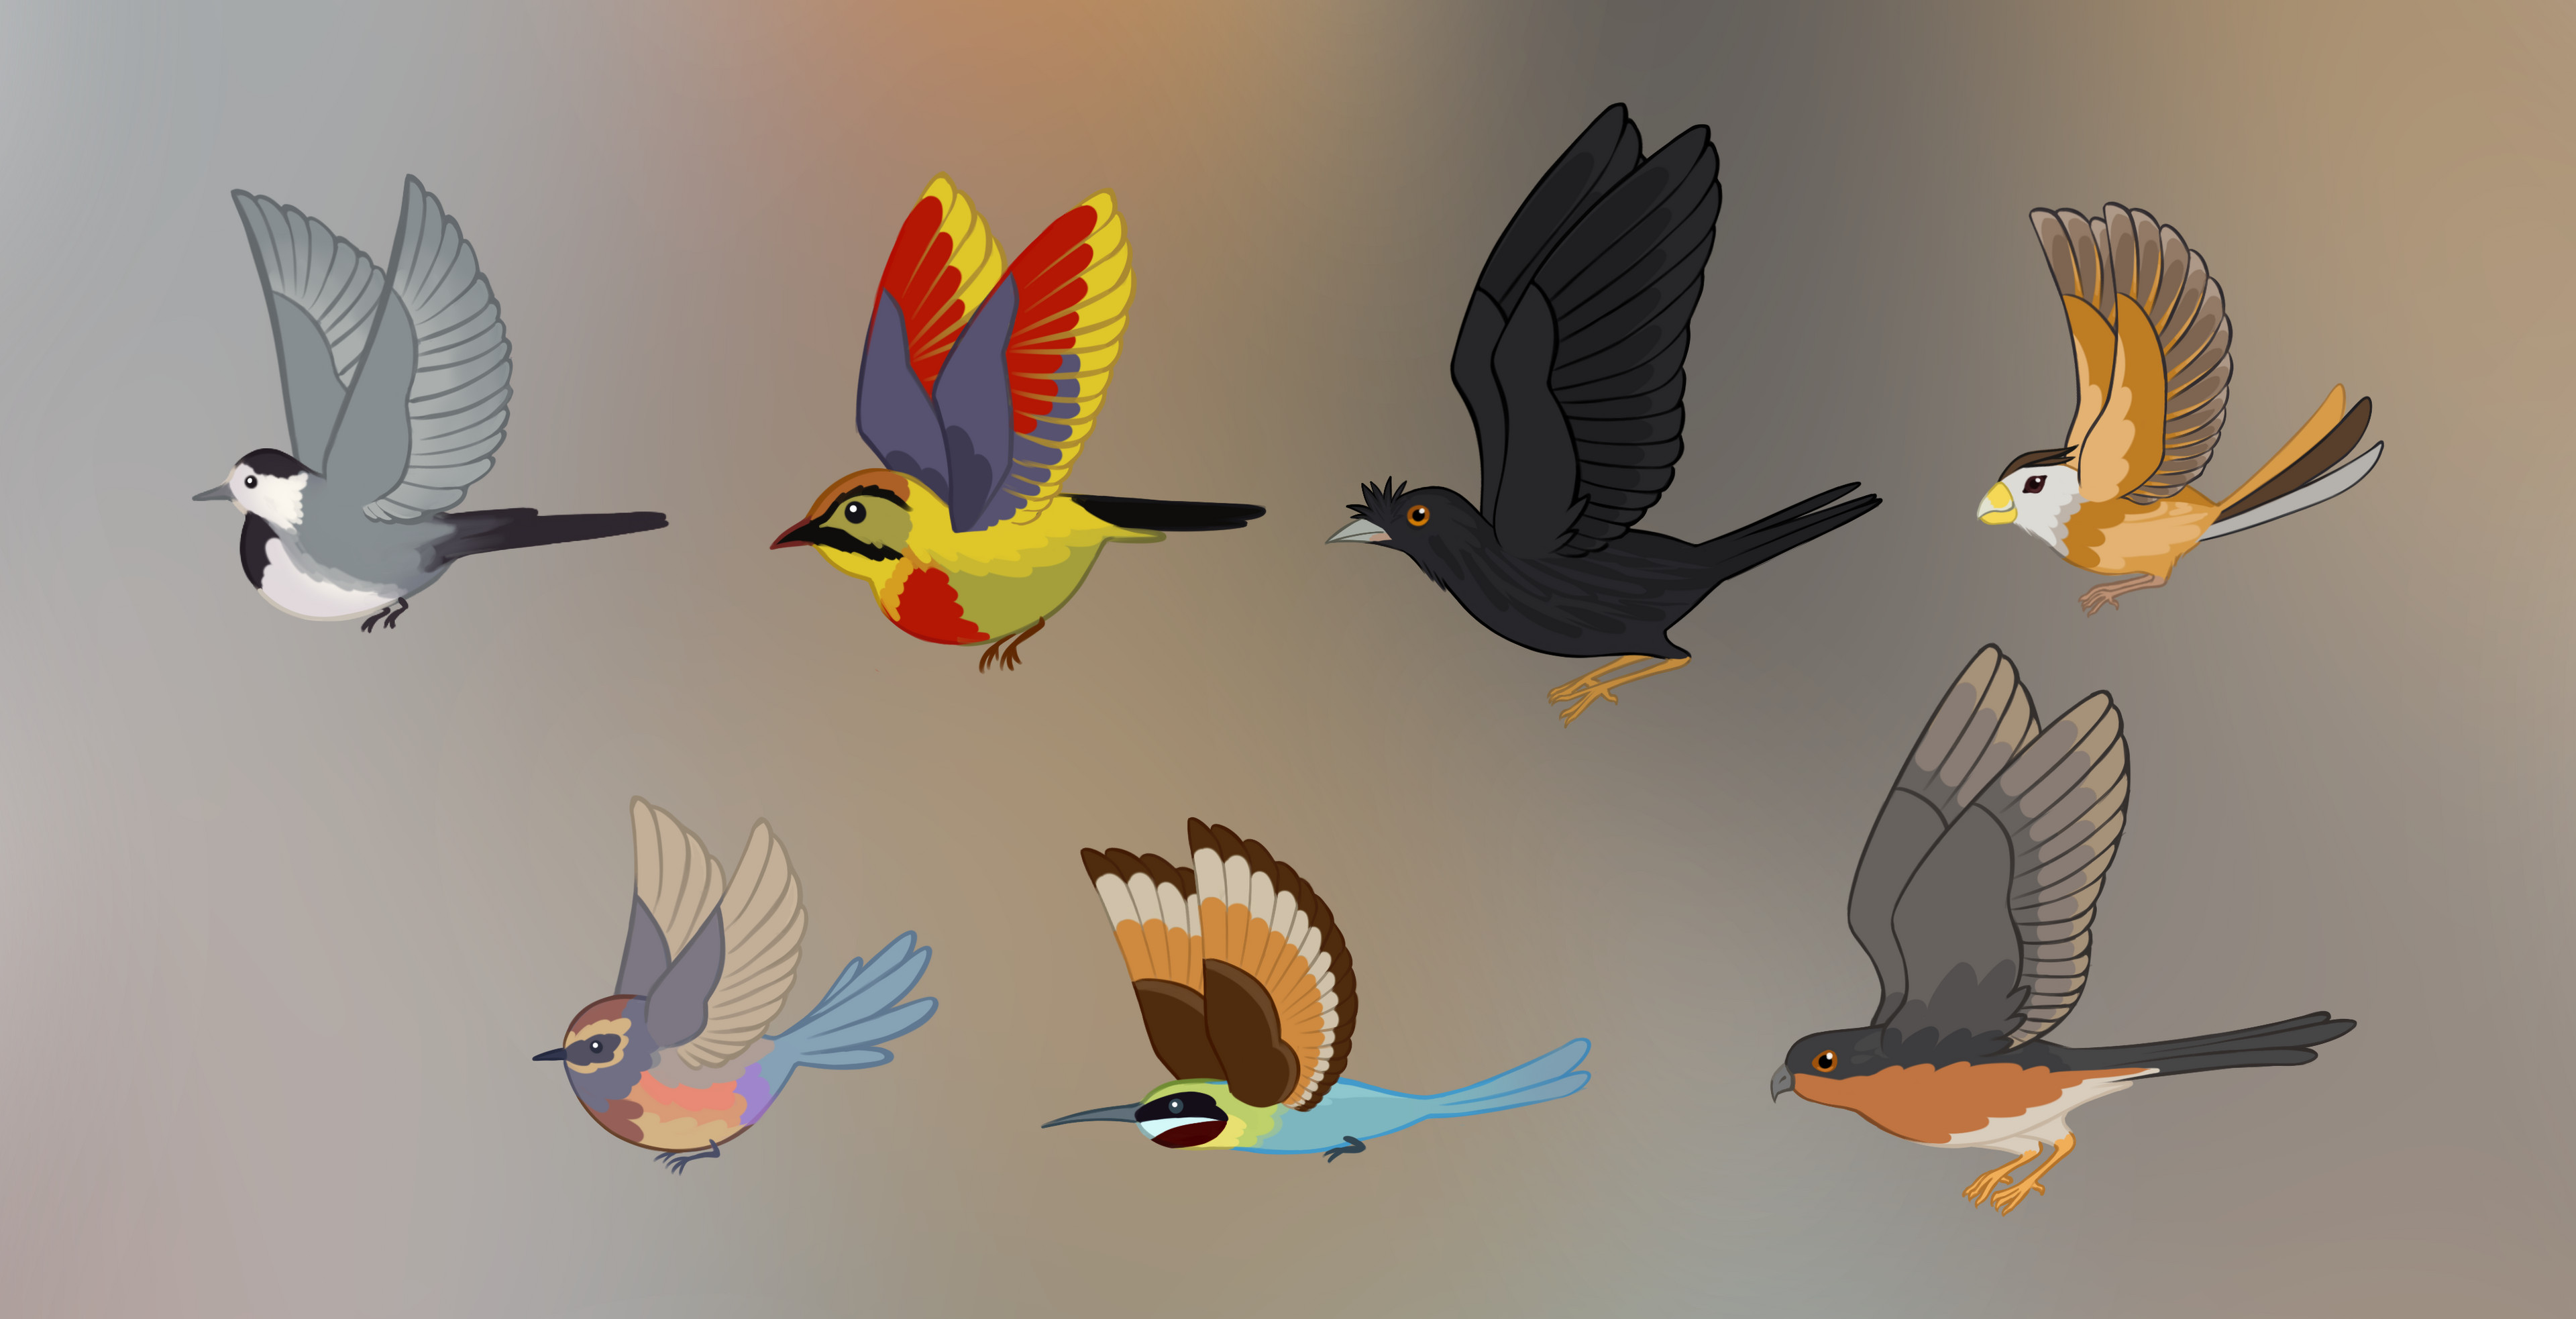 Chinese inspired birds, used for animation in cut-scenes.